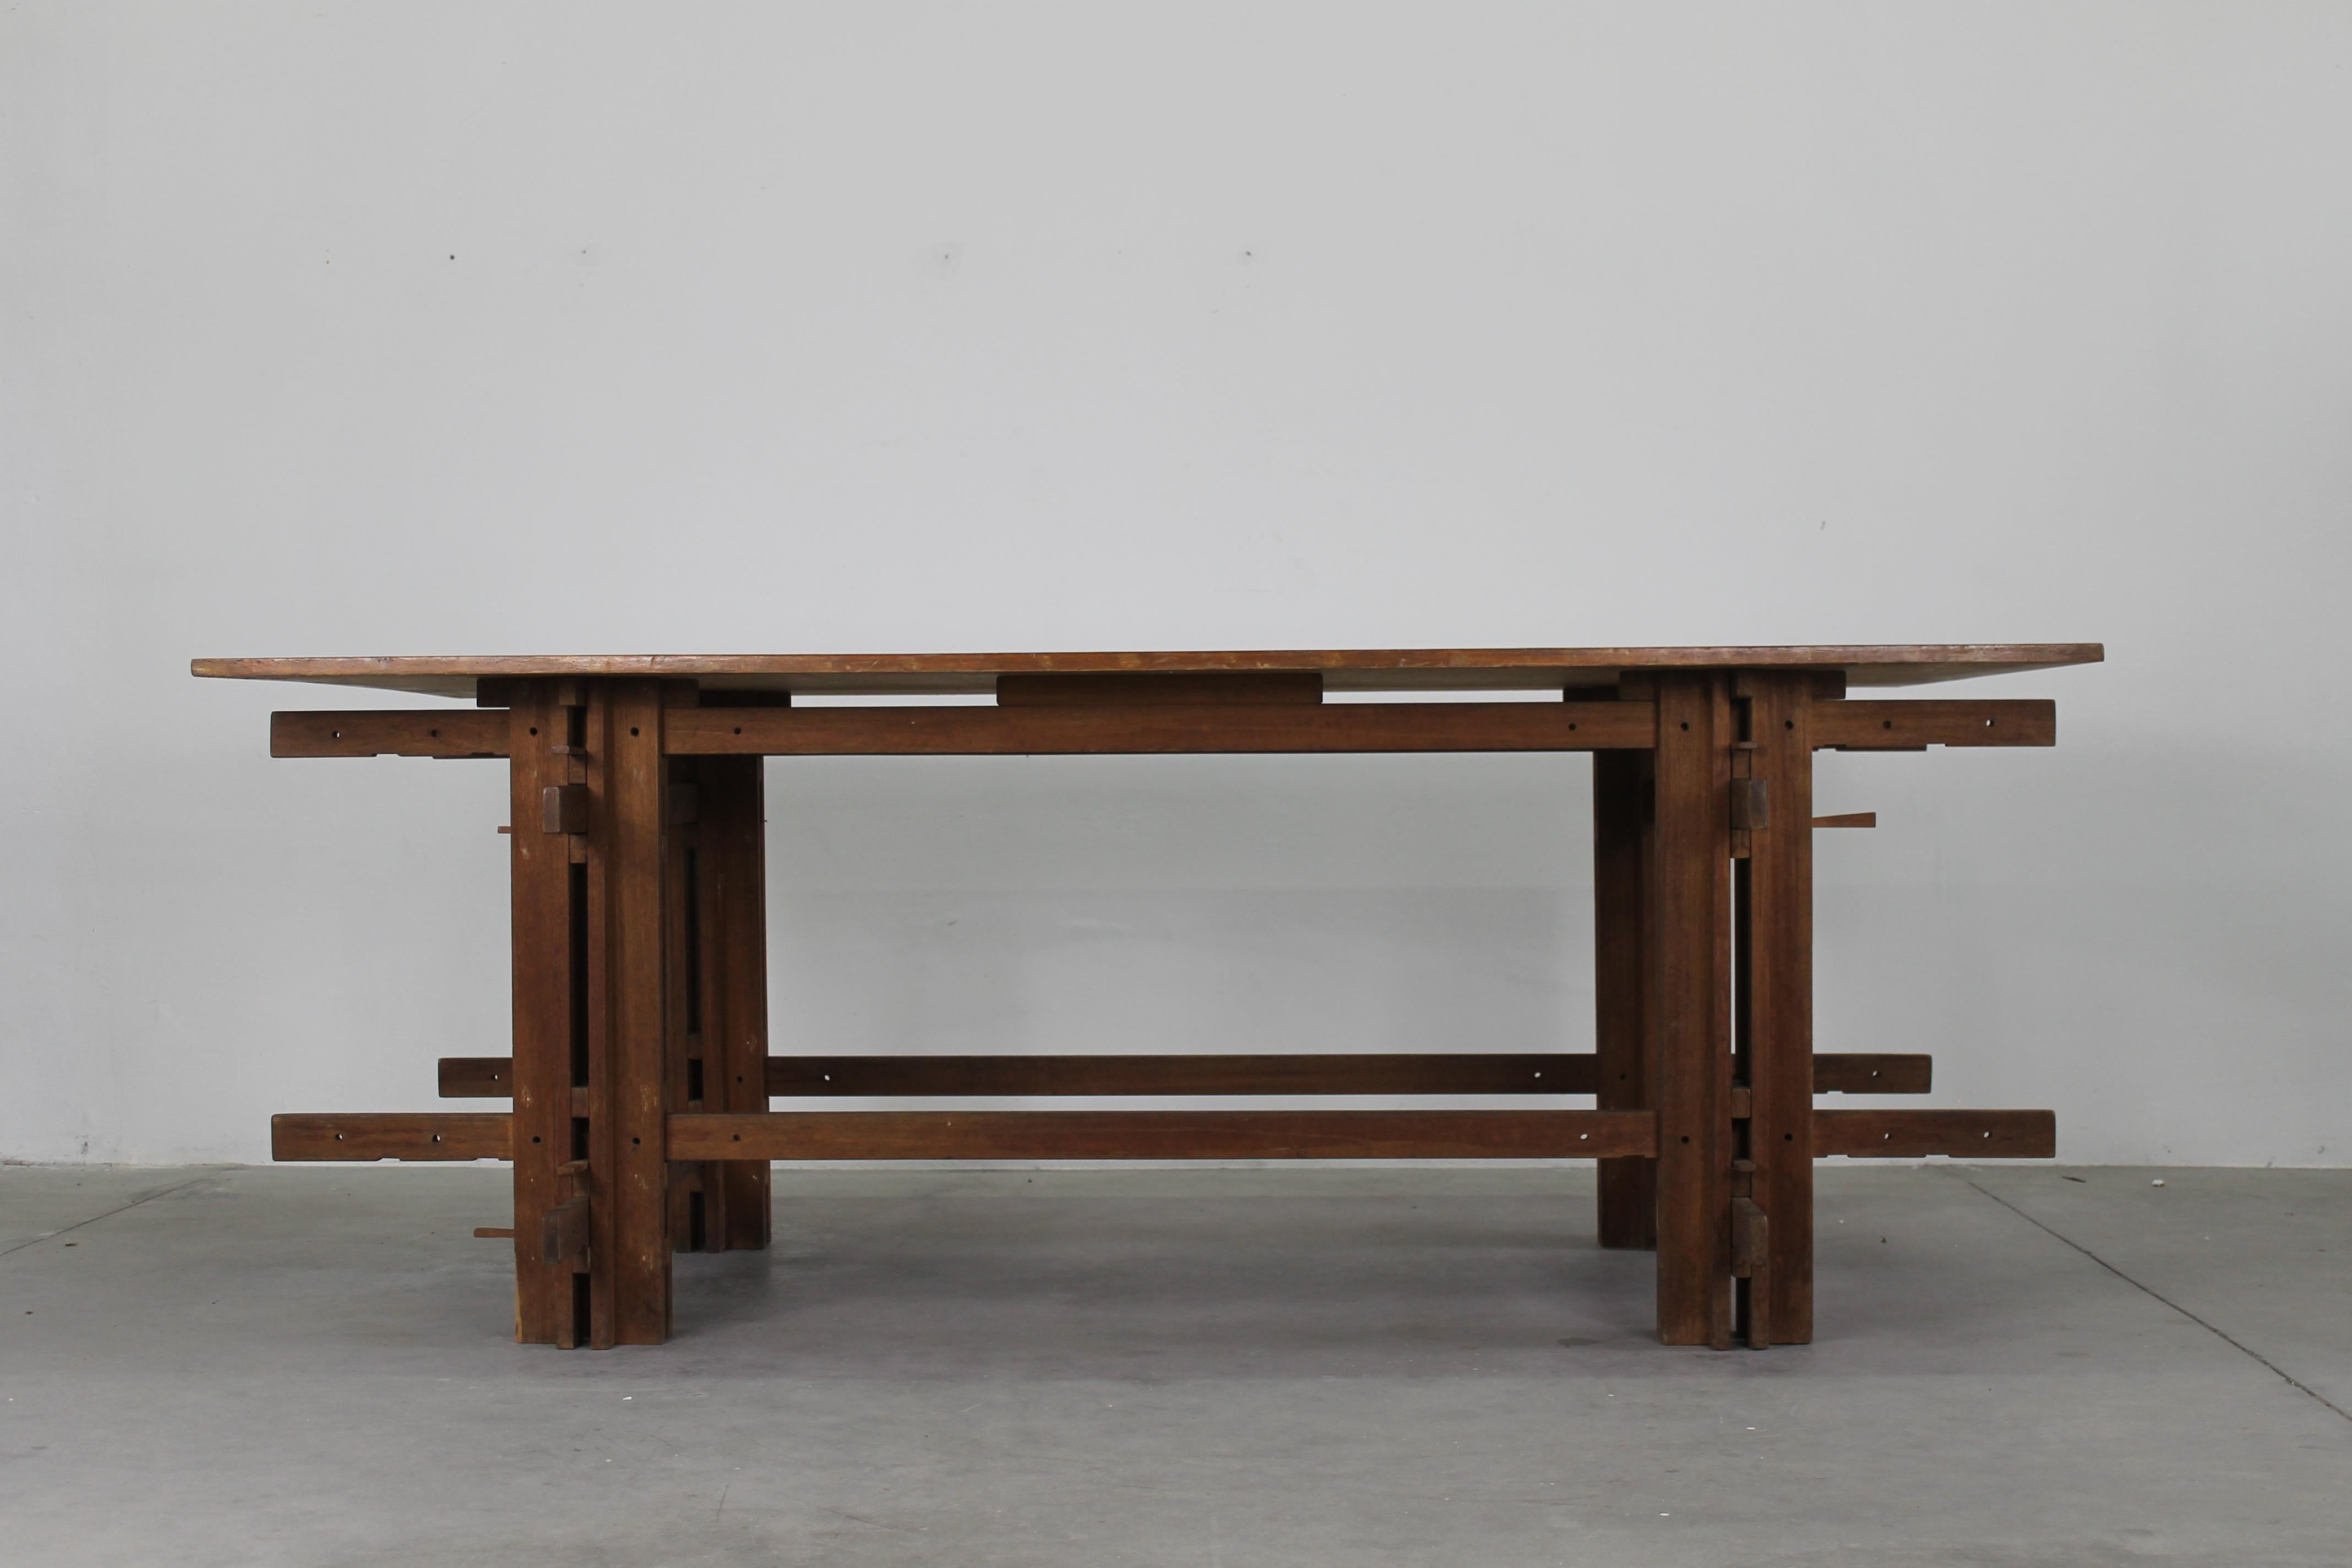 High work table in oak wood designed by Giuseppe Rivadossi and produced by Officine Rivadossi in 1973.
Originally realized for a fabrics Atelier in Brescia (Italy), this table present a complex interlocks structure composed by only oak pieces carved